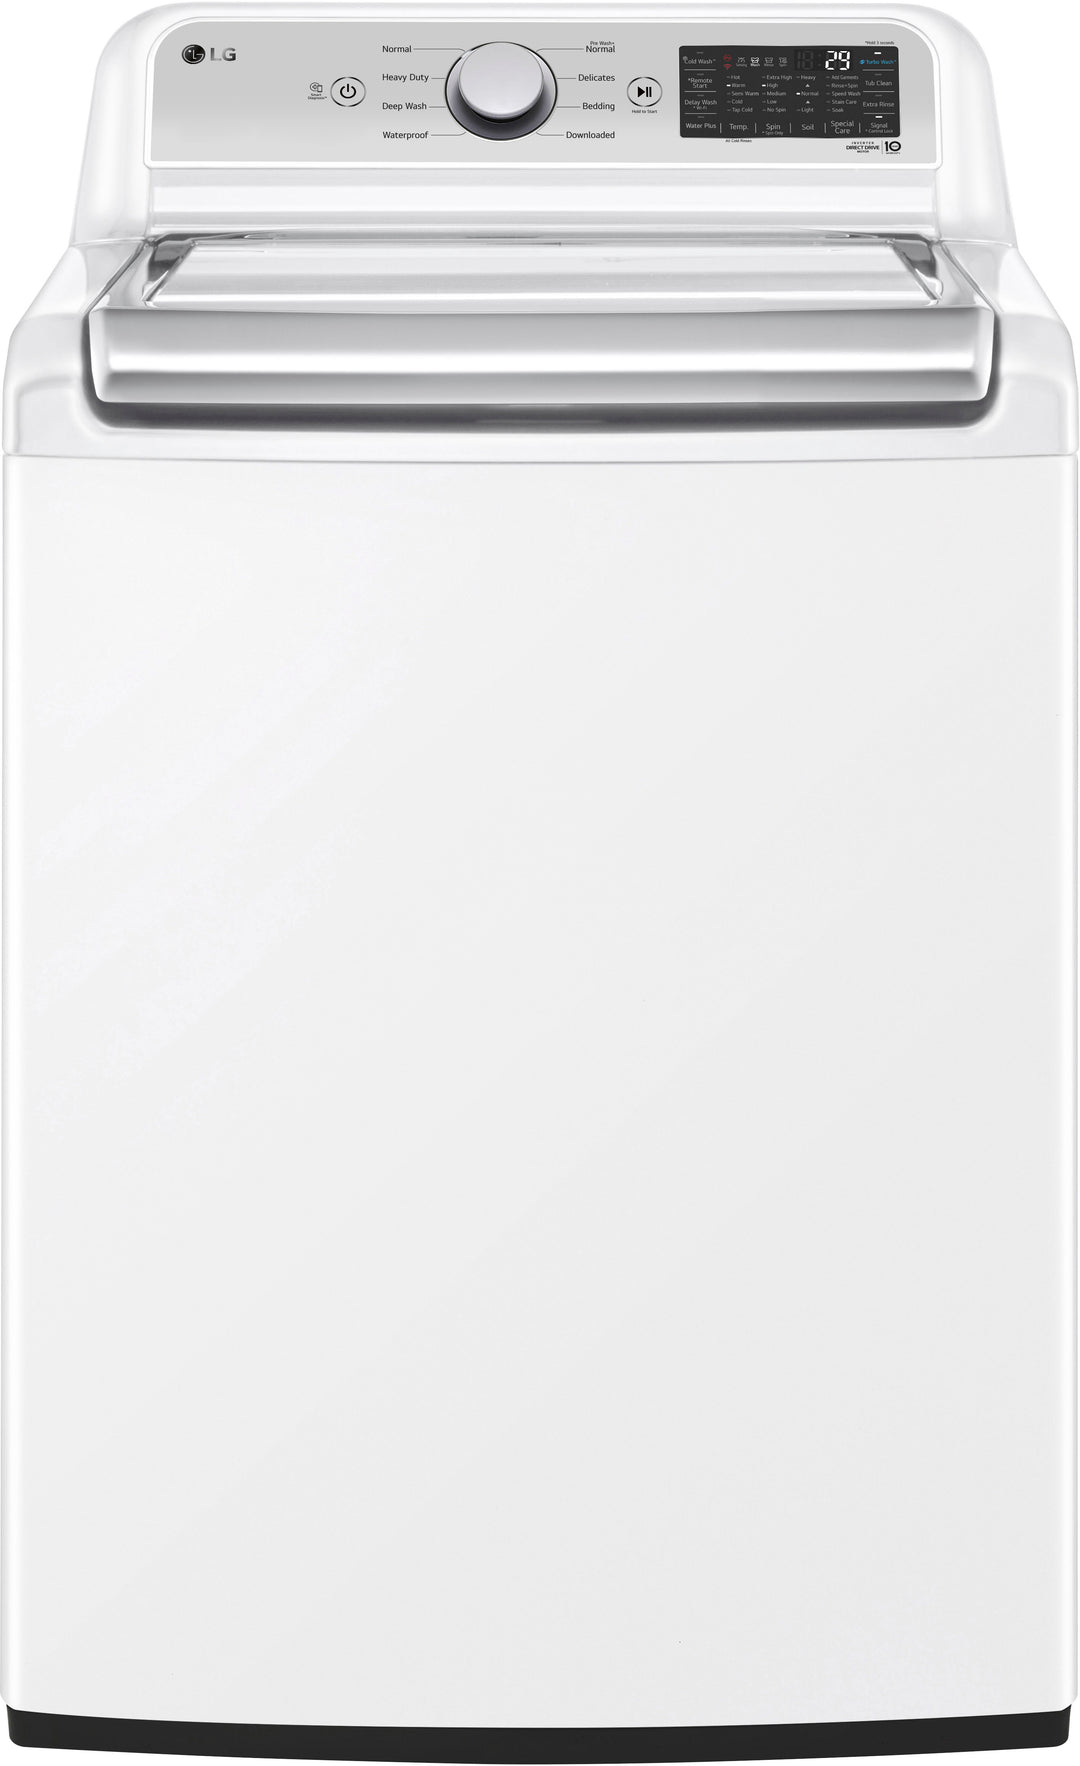 LG - 5.5 Cu. Ft. Smart Top Load Washer with TurboWash3D - White_0